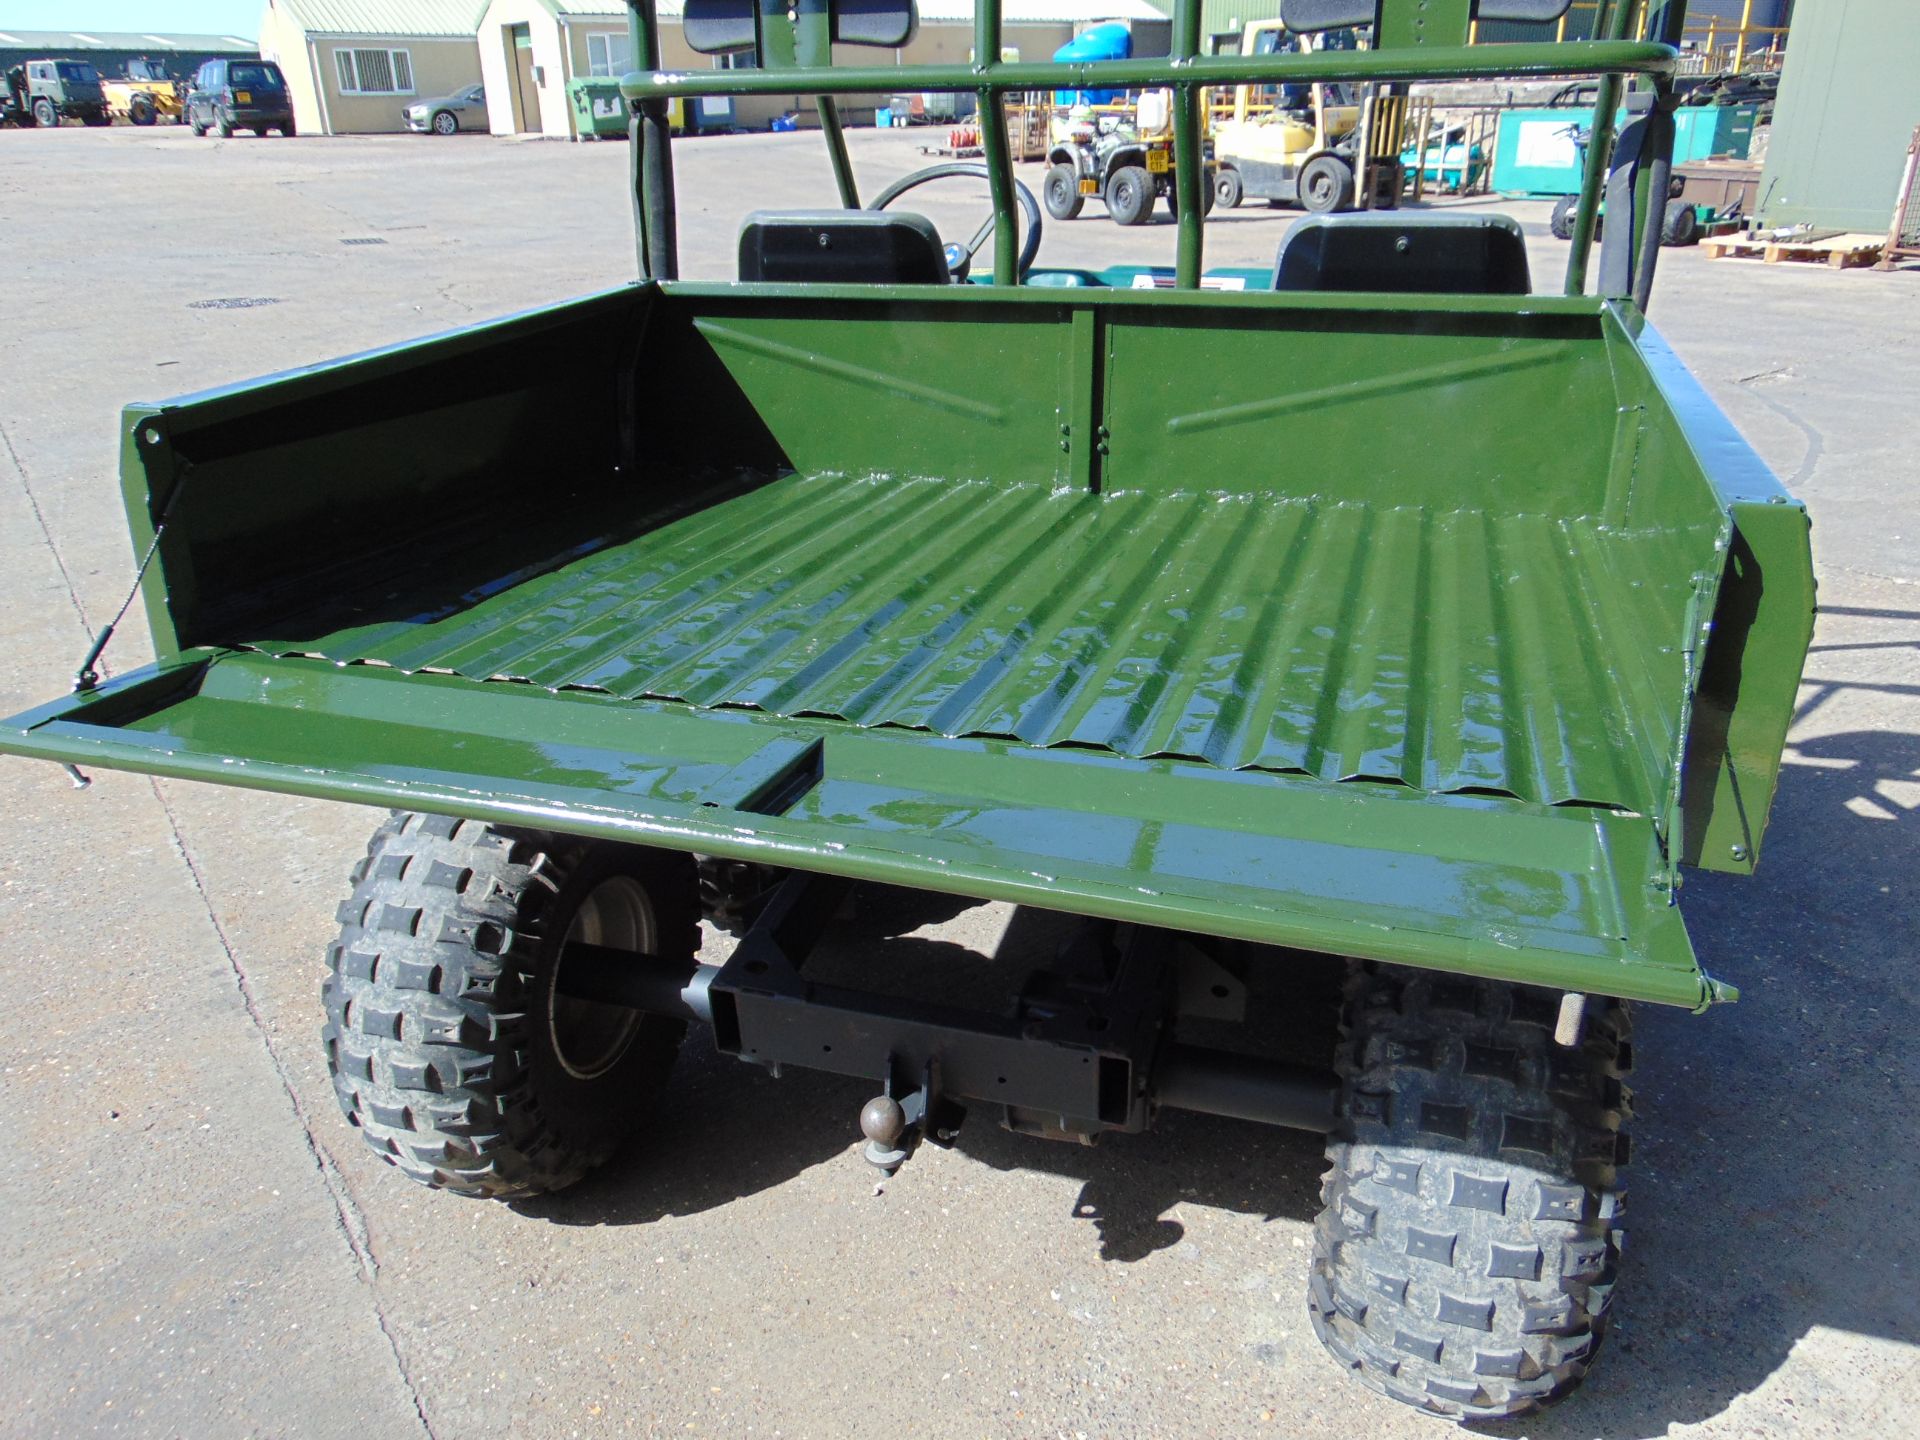 Polaris 6x6 Ranger Utility Vehicle Only 226 Hours! From National Grid. - Image 14 of 27